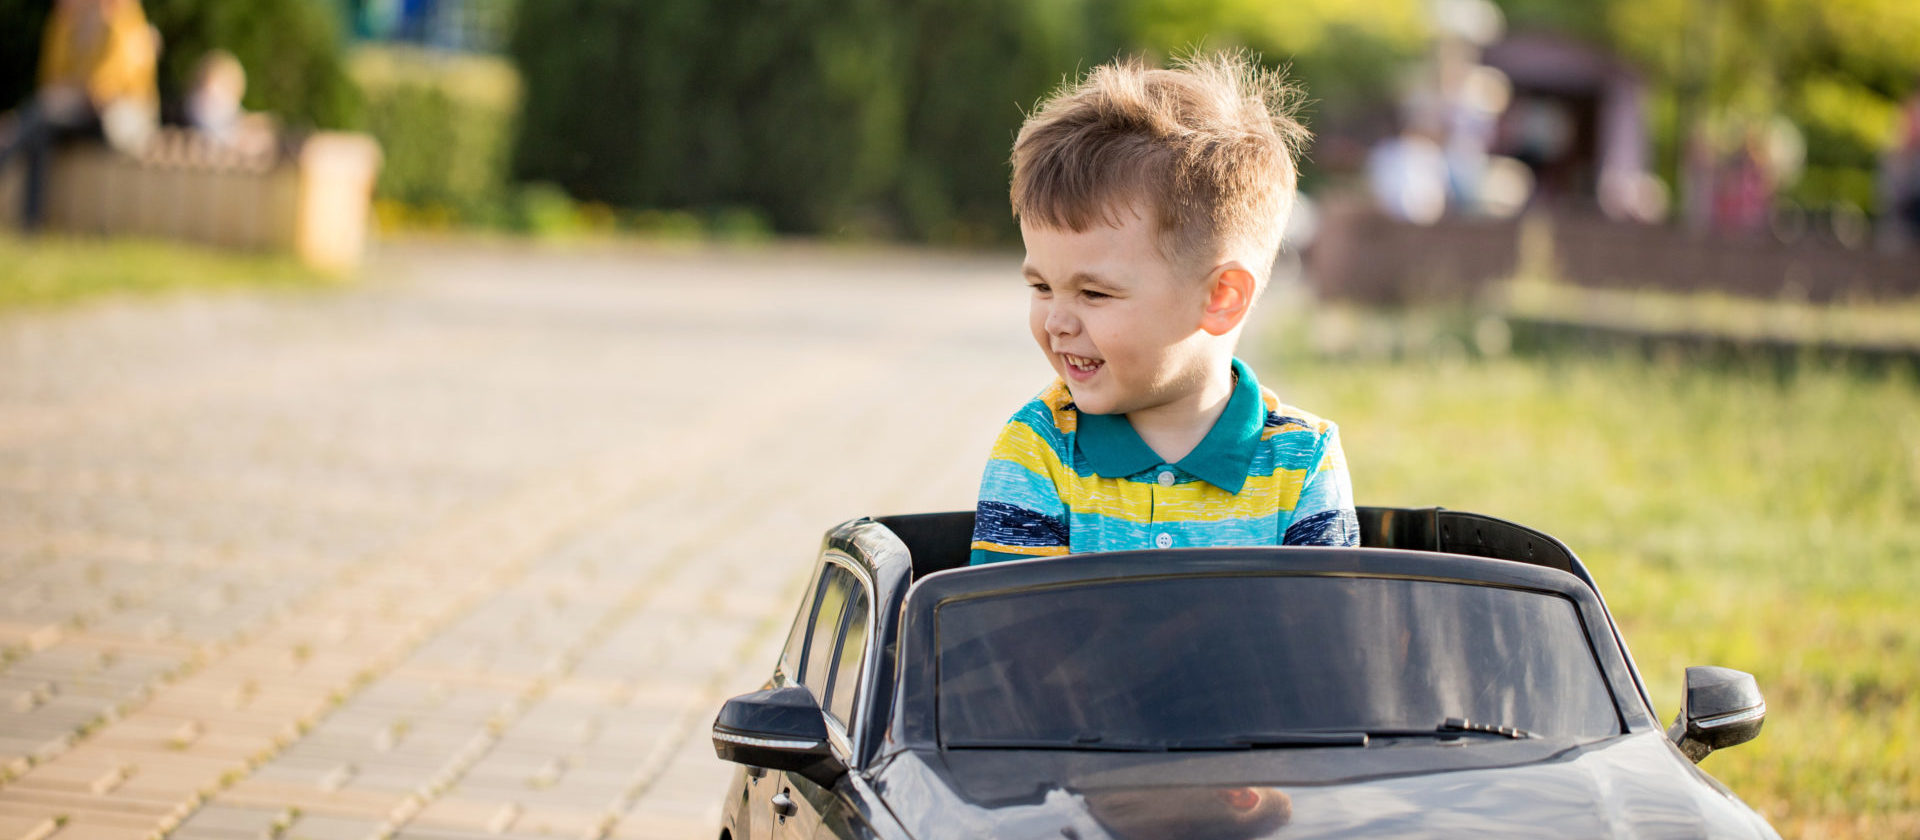 Are Power Wheels Good for Toddlers?